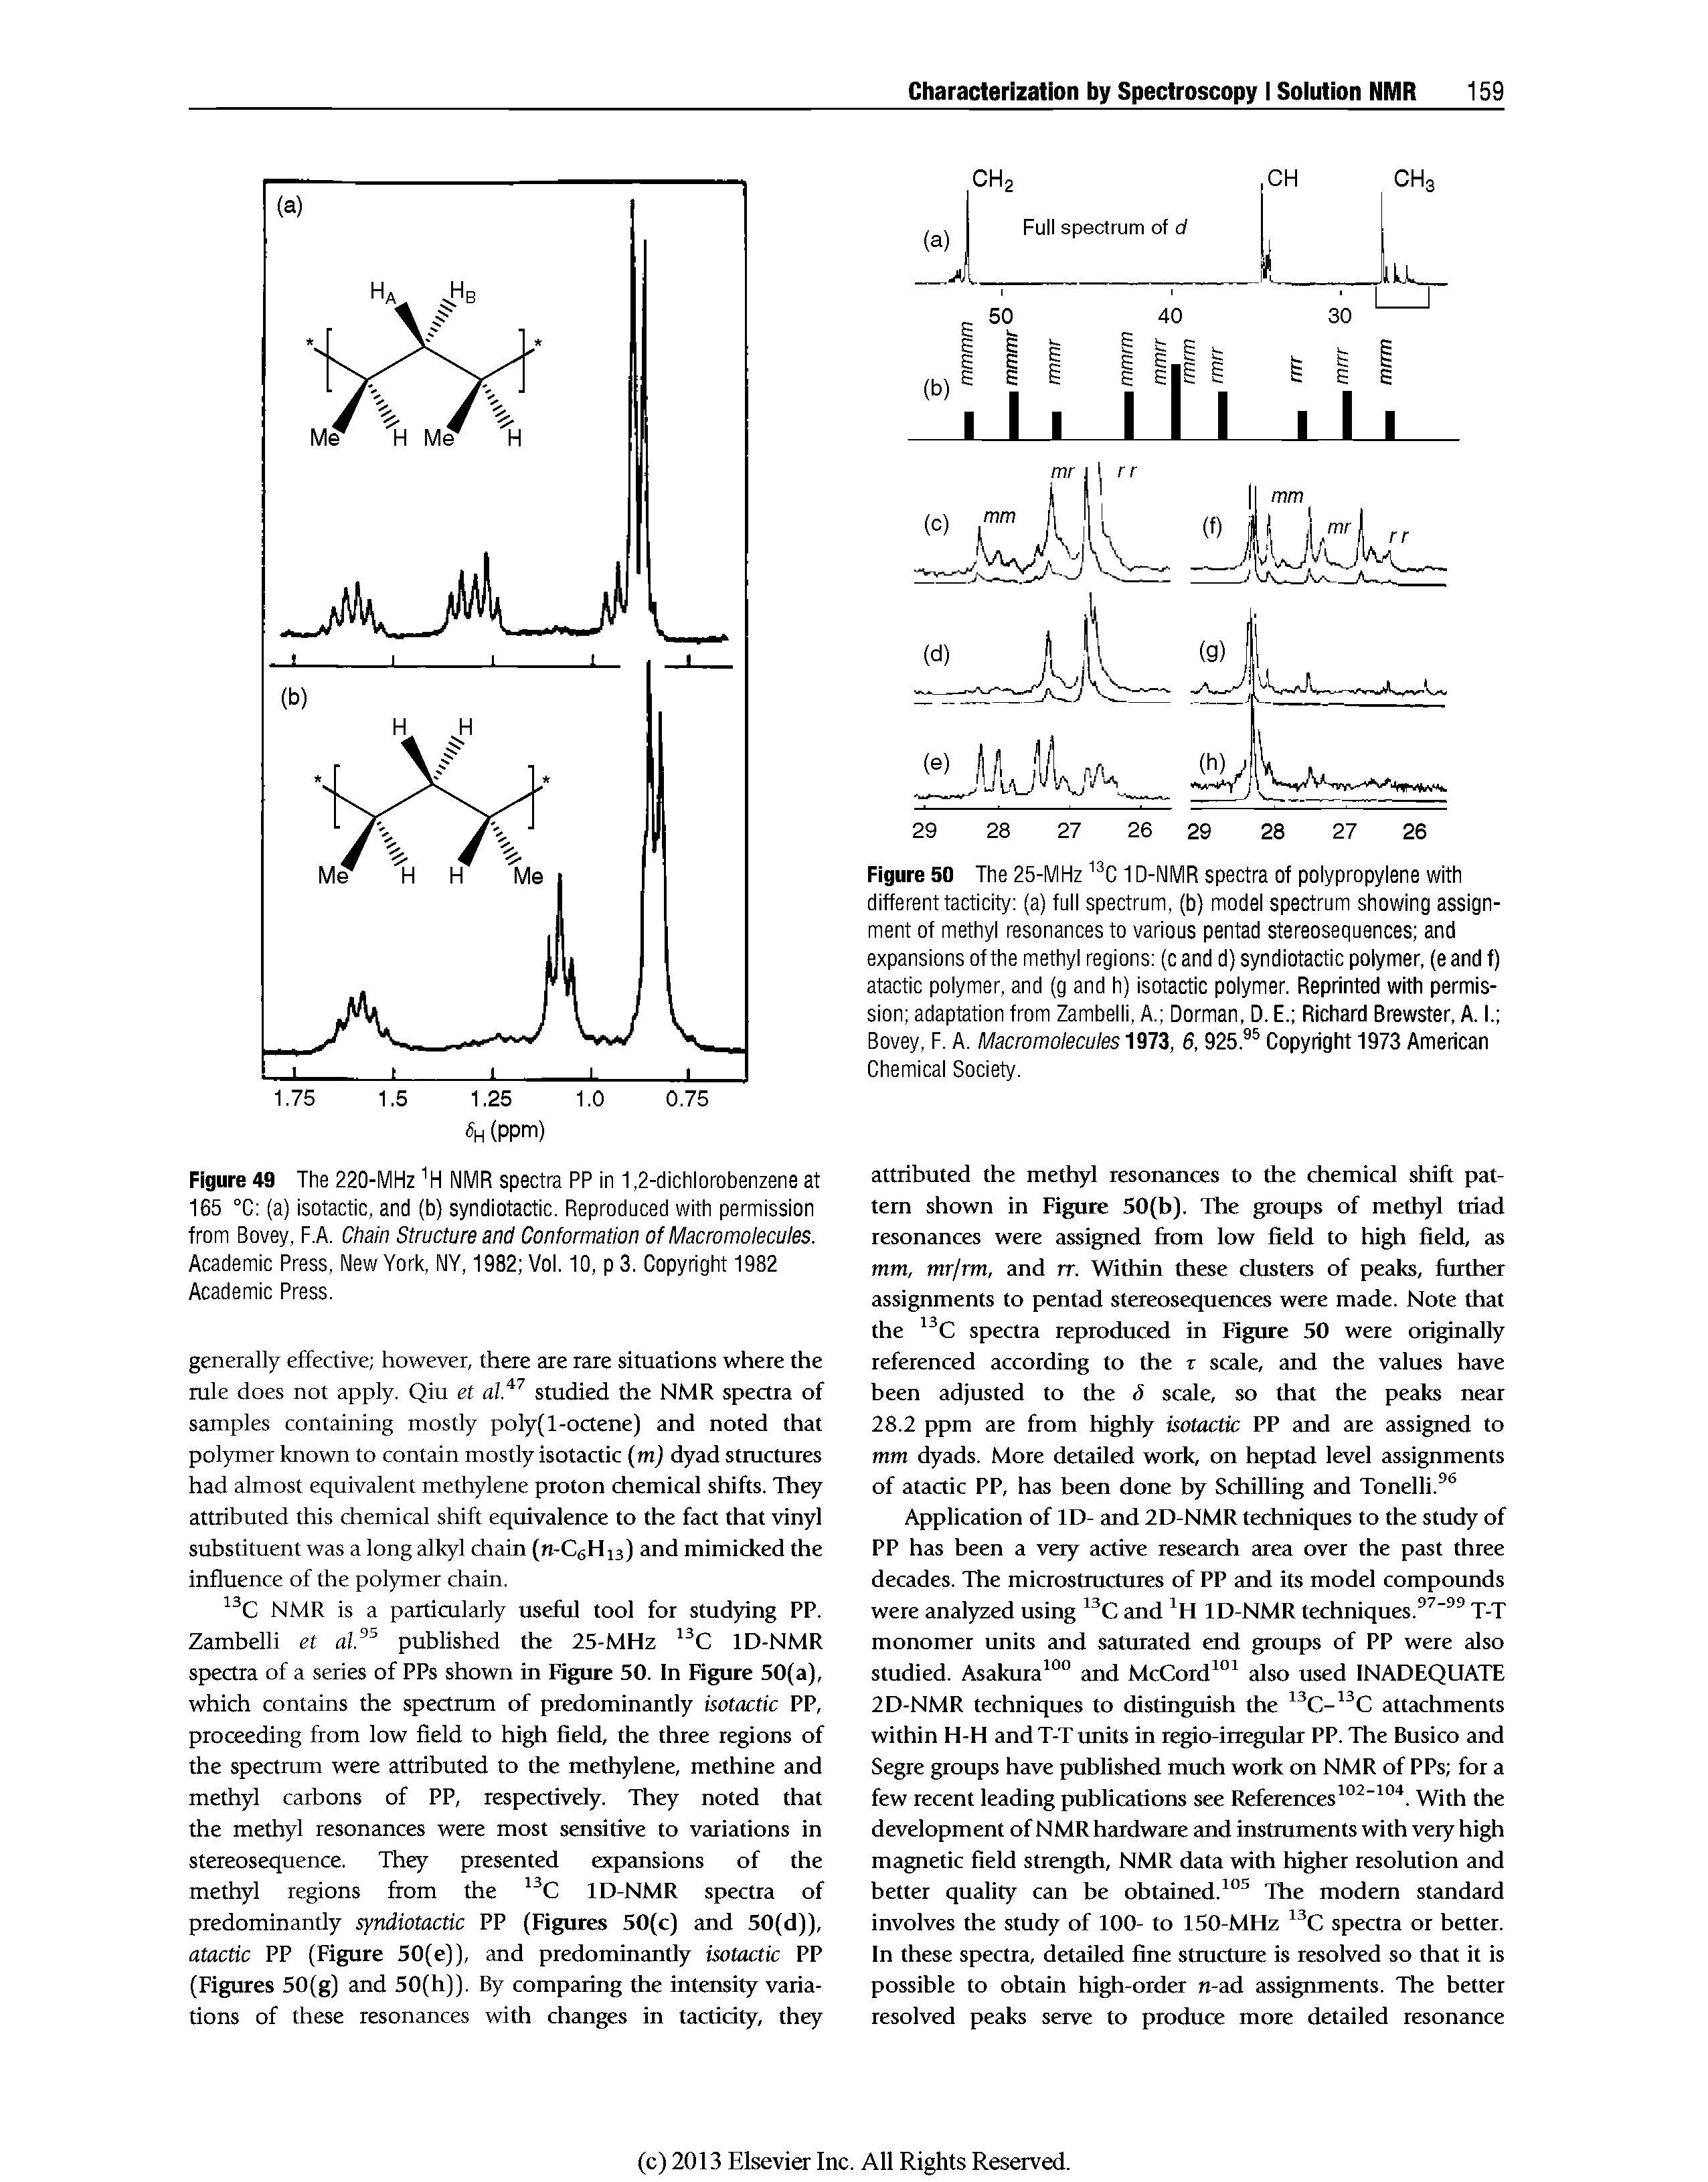 Figure 49 The 220-MHz NMR spectra PP in 1,2-dichlorobenzene at 165 °C (a) isotactic, and (b) syndiotactic. Reproduced with permission from Bovey, F.A. Chain Structure and Conformation of Macromoiecuies. Academic Press, New York, NY, 1982 Vol. 10, p 3. Copyright 1982 Academic Press.